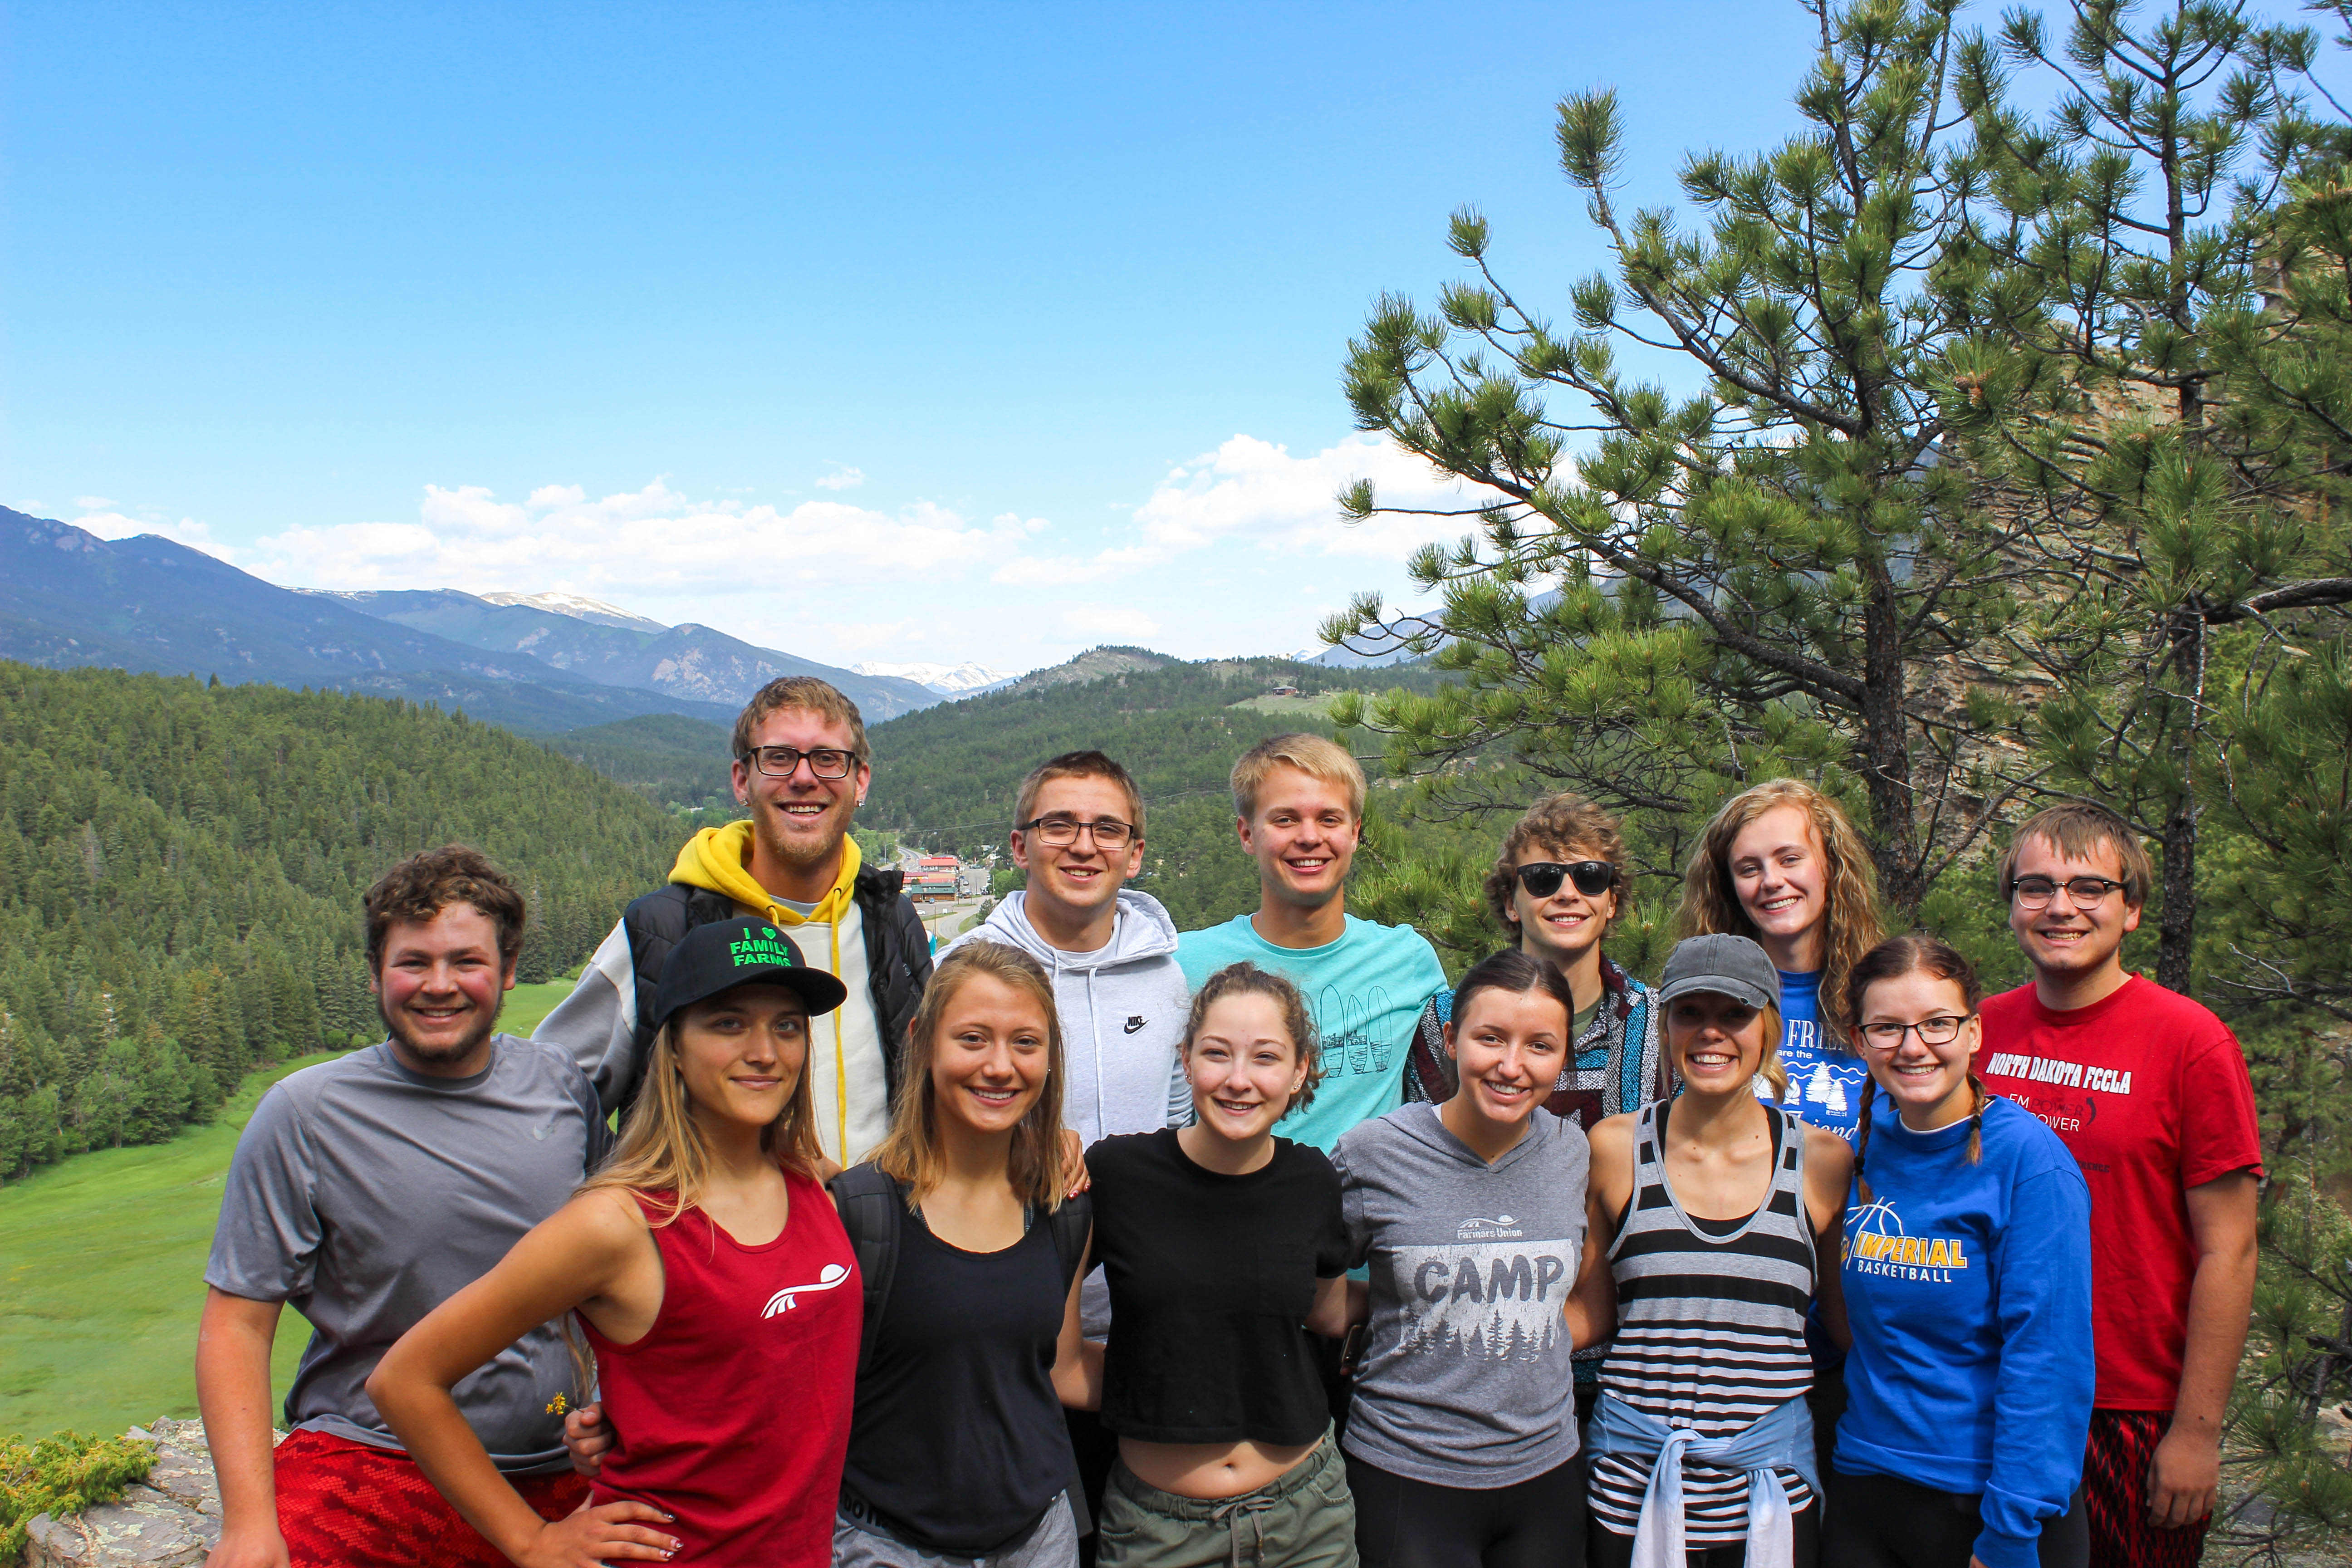 Farmers Union Hosts 83rd Annual All-States Leadership Camp